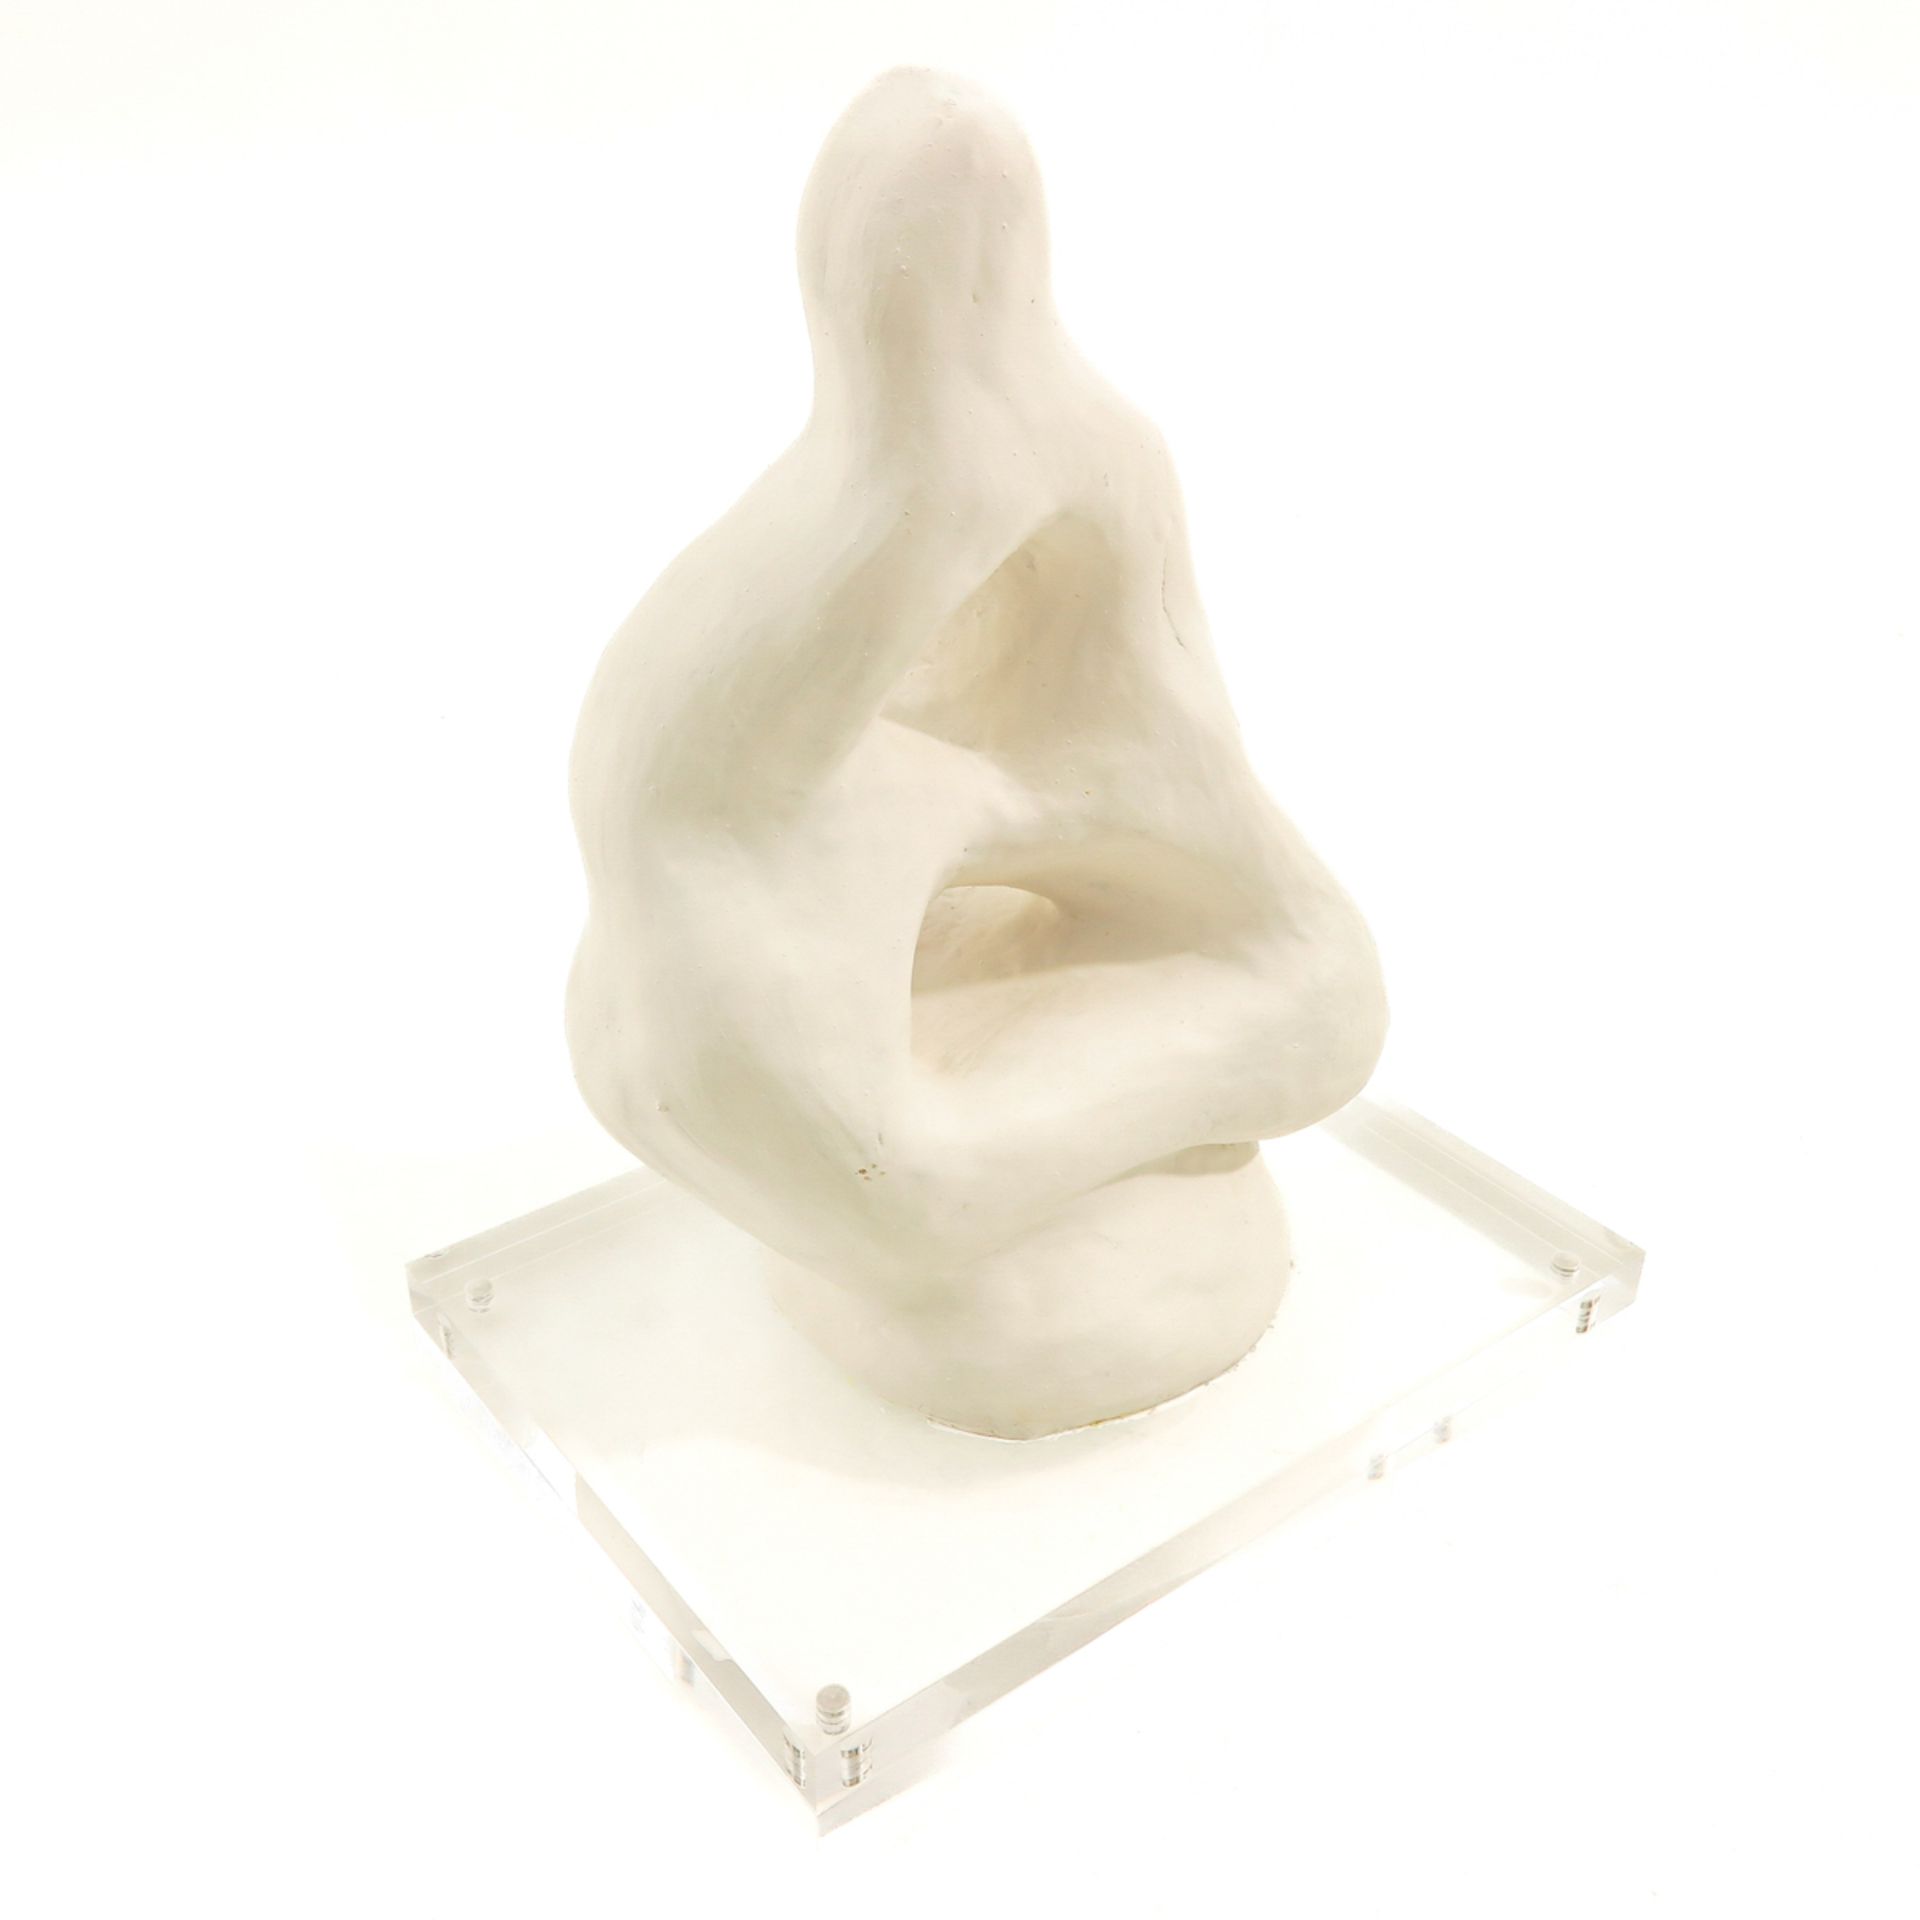 A Sculpture - Image 8 of 8